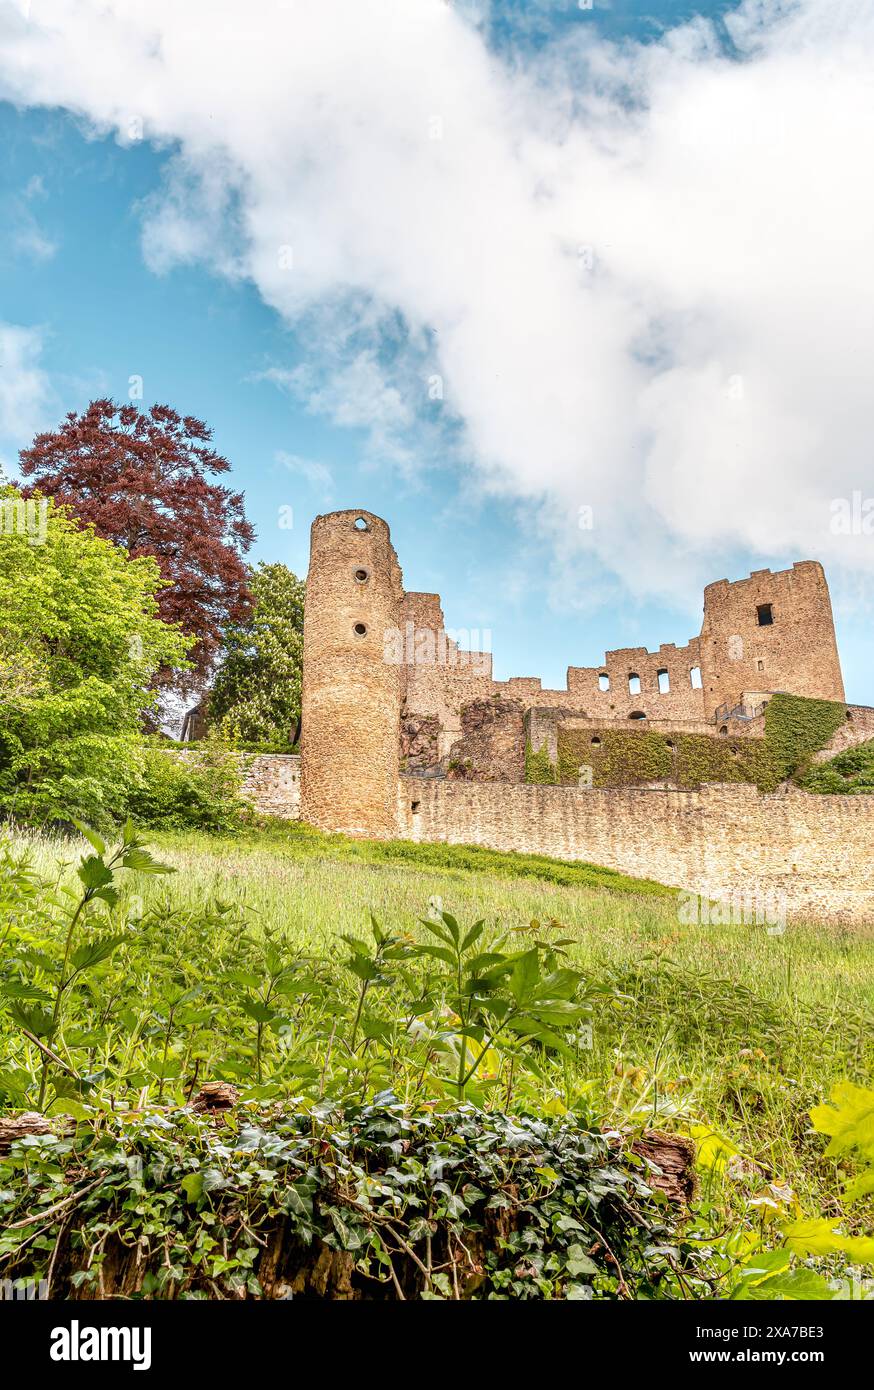 View of the castle ruins of Frauenstein in the town of the same name, Saxony, Germany Stock Photo